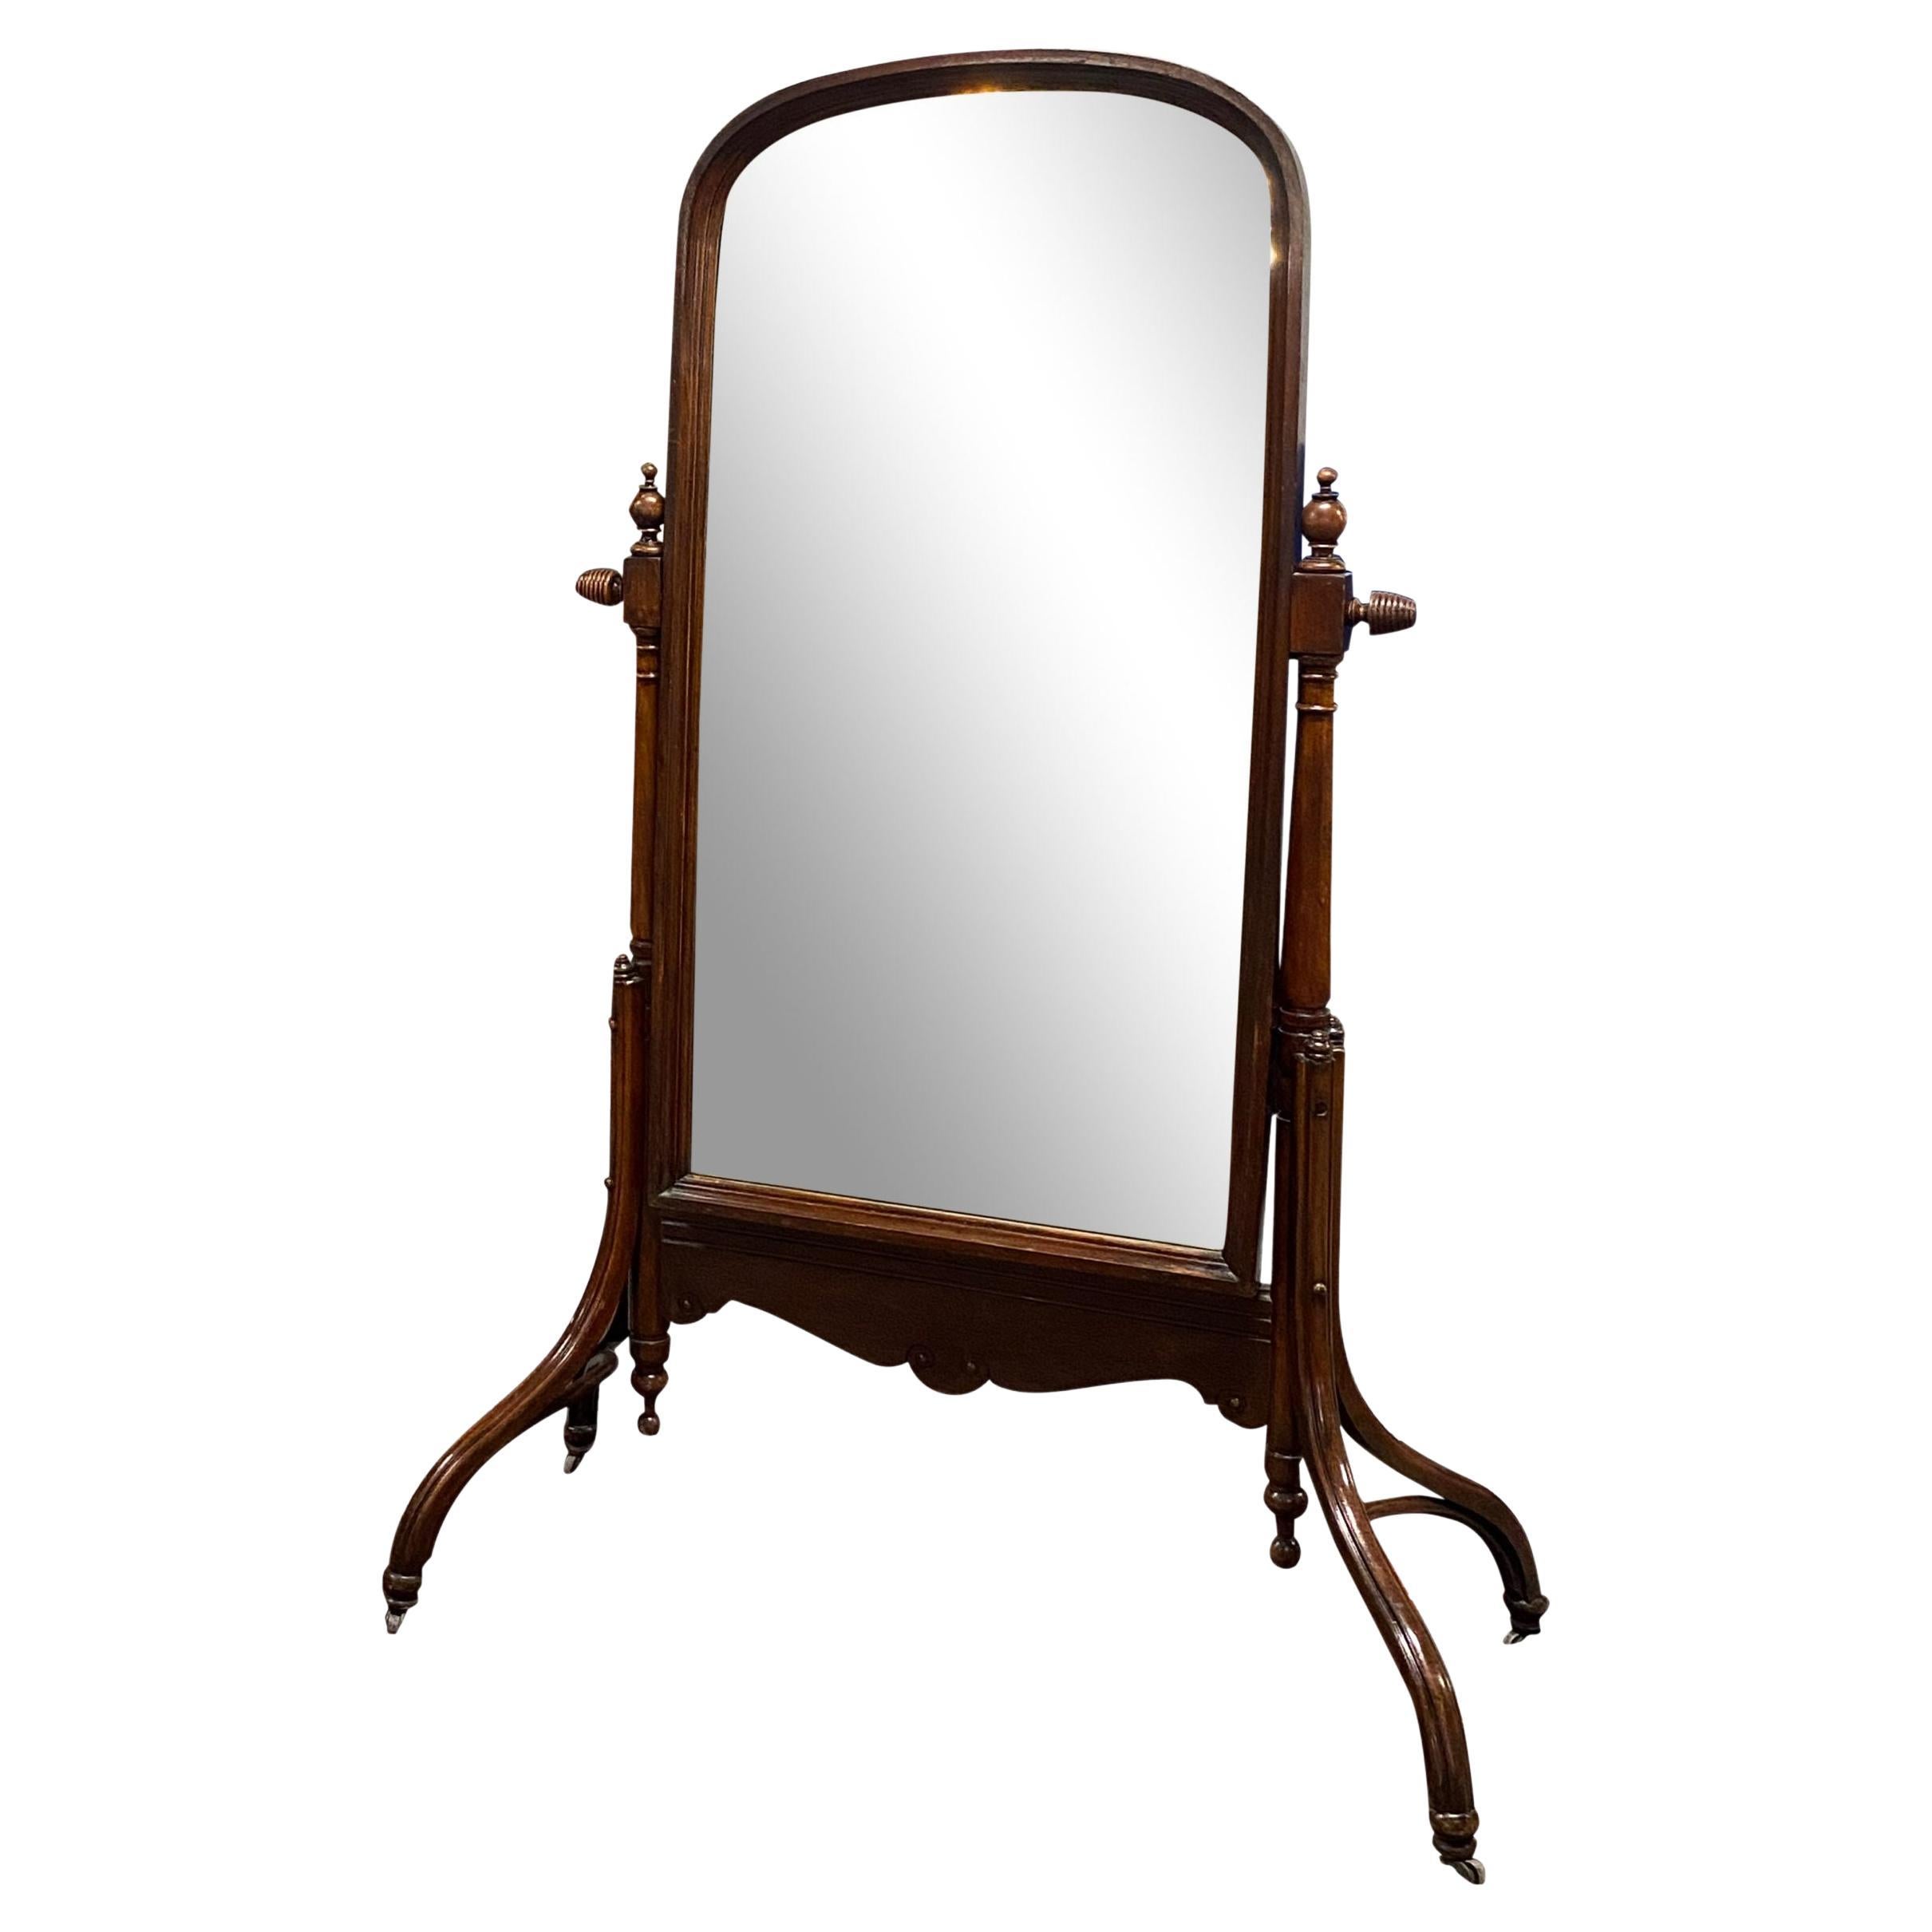 What is a Cheval mirror called?